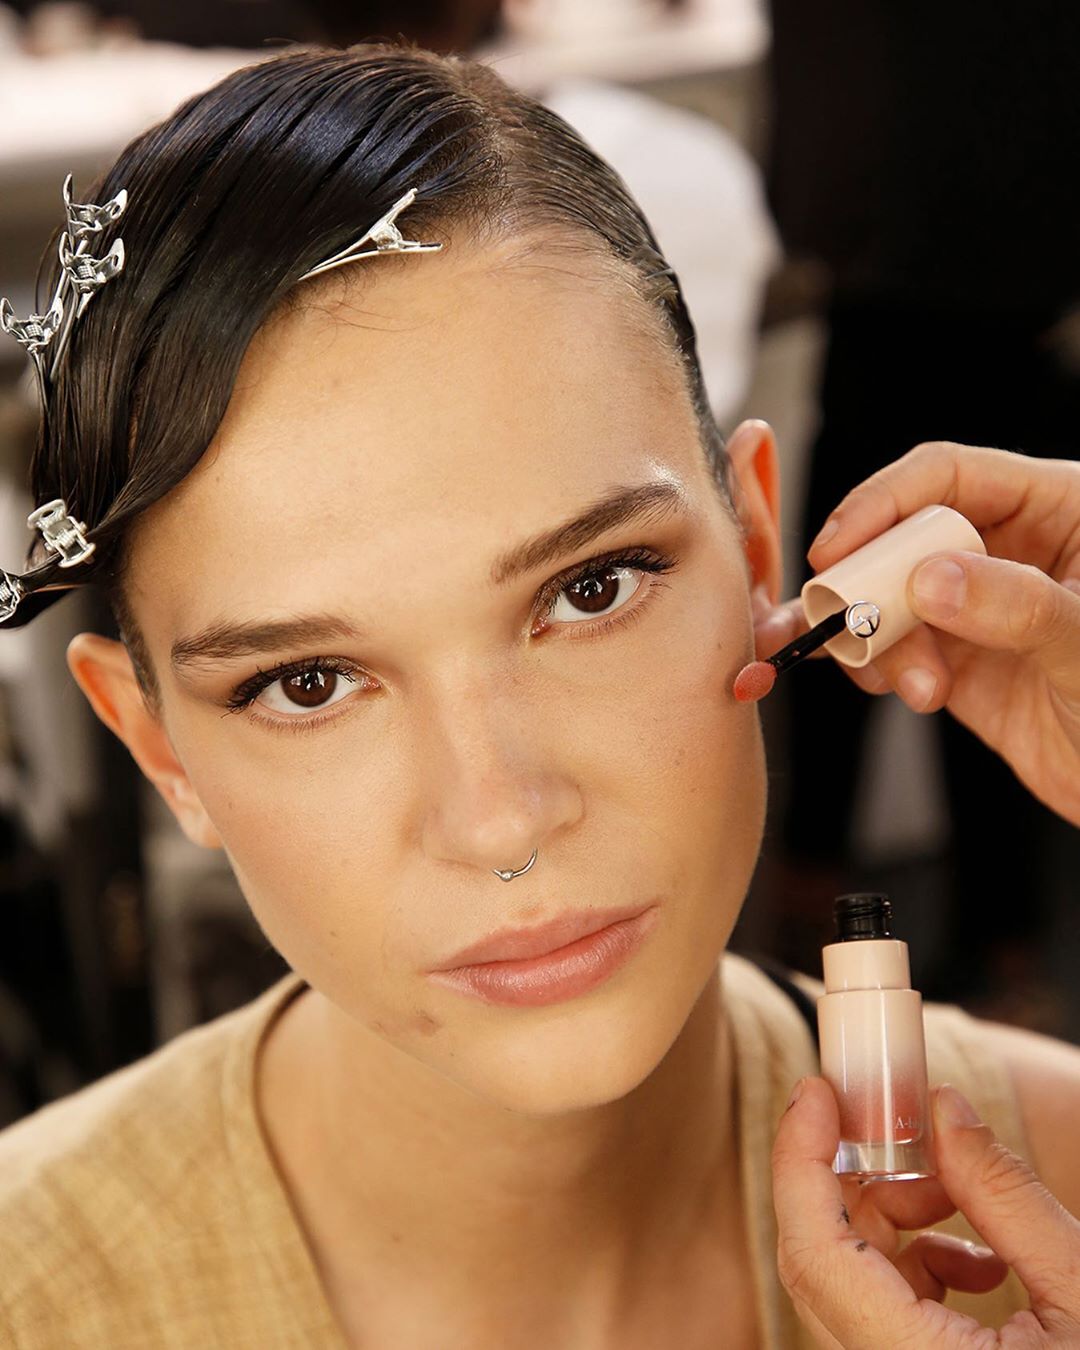 Armani beauty - Backstage beauty. Adding the finishing touches to the soft and natural beauty look for the @GiorgioArmani Men’s and Women’s SS21 Collection with NEO NUDE A-BLUSH. 

#Armanibeauty #Arma...